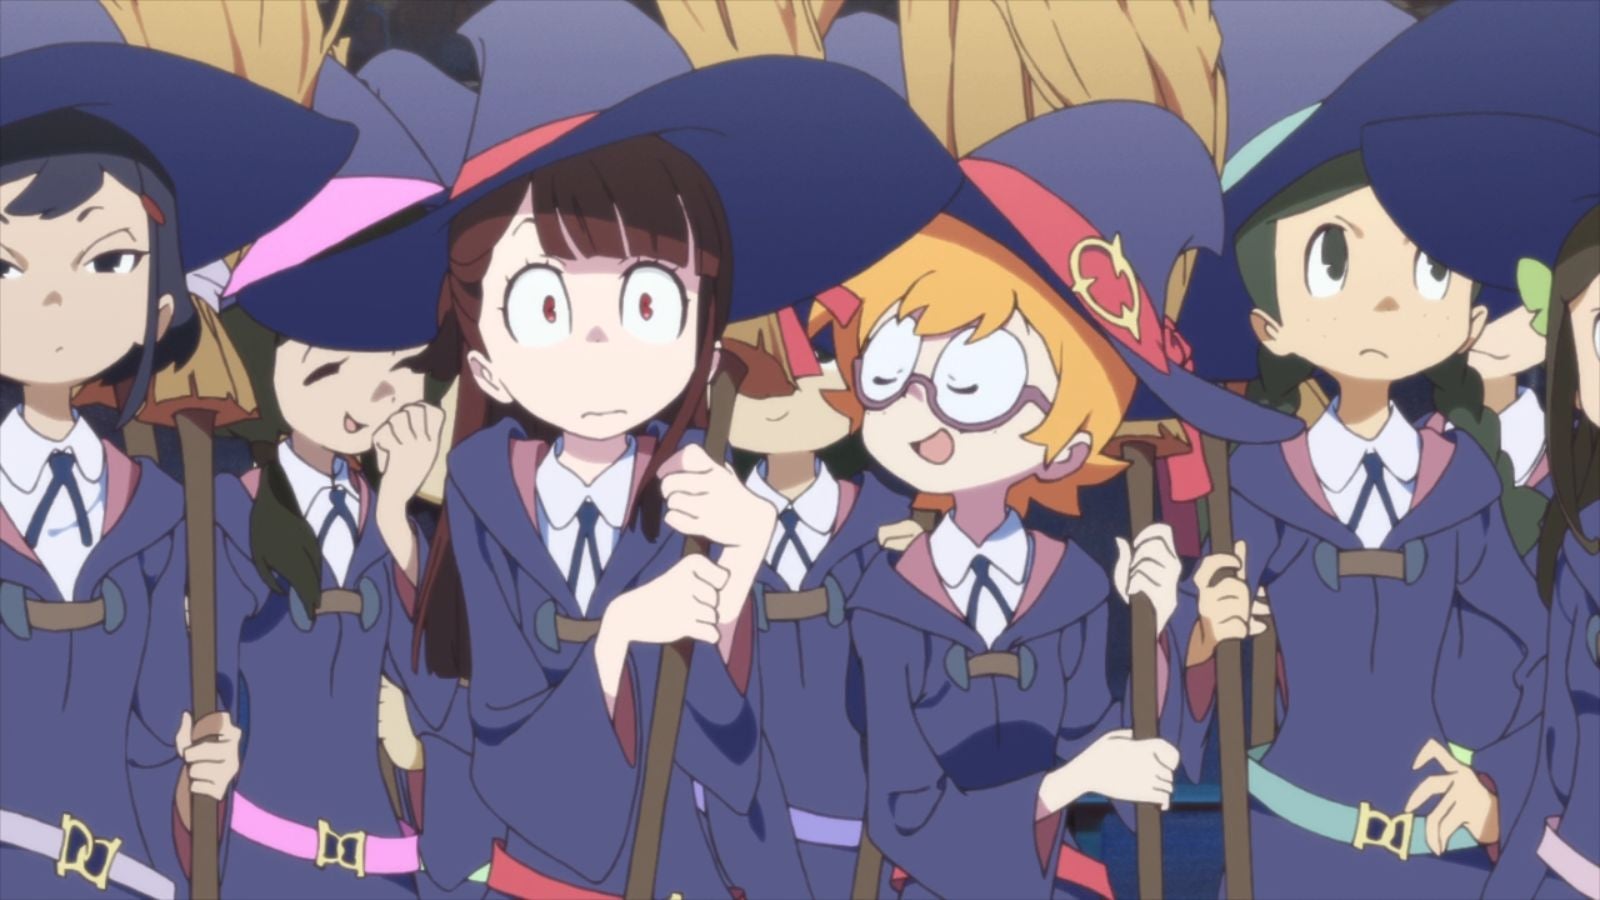 Studio Trigger's Next Anime Is LITTLE WITCH ACADEMIA